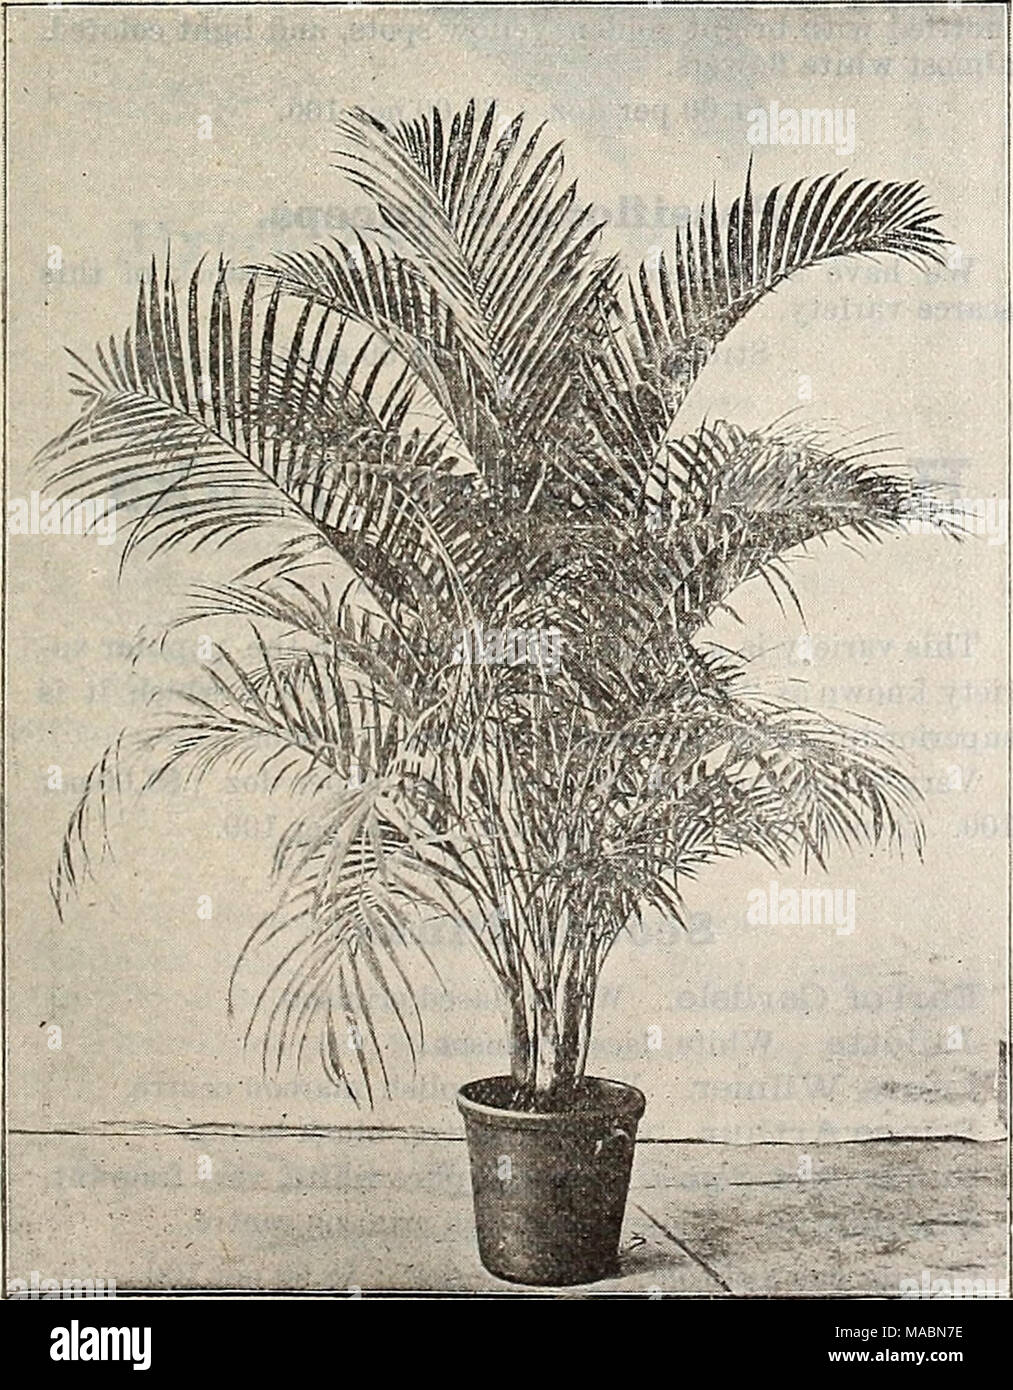 . Dreer's quarterly wholesale price list of seeds, plants &amp;c. : spring edition April 1896 June . Areca Lntescens. Inch Pots. 9* 3 4 5 6 Inches high. 6 12 to 15 15 Per doz. 75 $1 25 3 50 Per 100. 6 00 $10 00 25 00 15 (3 plants in a pot) 24 to 30 (2 and 3 plants in pot) Per 1000. $ 50 00 95 00 275 00 Per doz. $ 6 00 15 00 Areca Lutescens. Specimen Plants of Areca Lntescens. A limited lot of really grand specimen plants in 12 and 14 inch pots, from 7 to 8 feet high, bushy and perfect, at $20.00, $25.00 and $30.00 each. Cocos Weddelliana. Fine young plants, in 2} inch pots, about 6 inches high Stock Photo